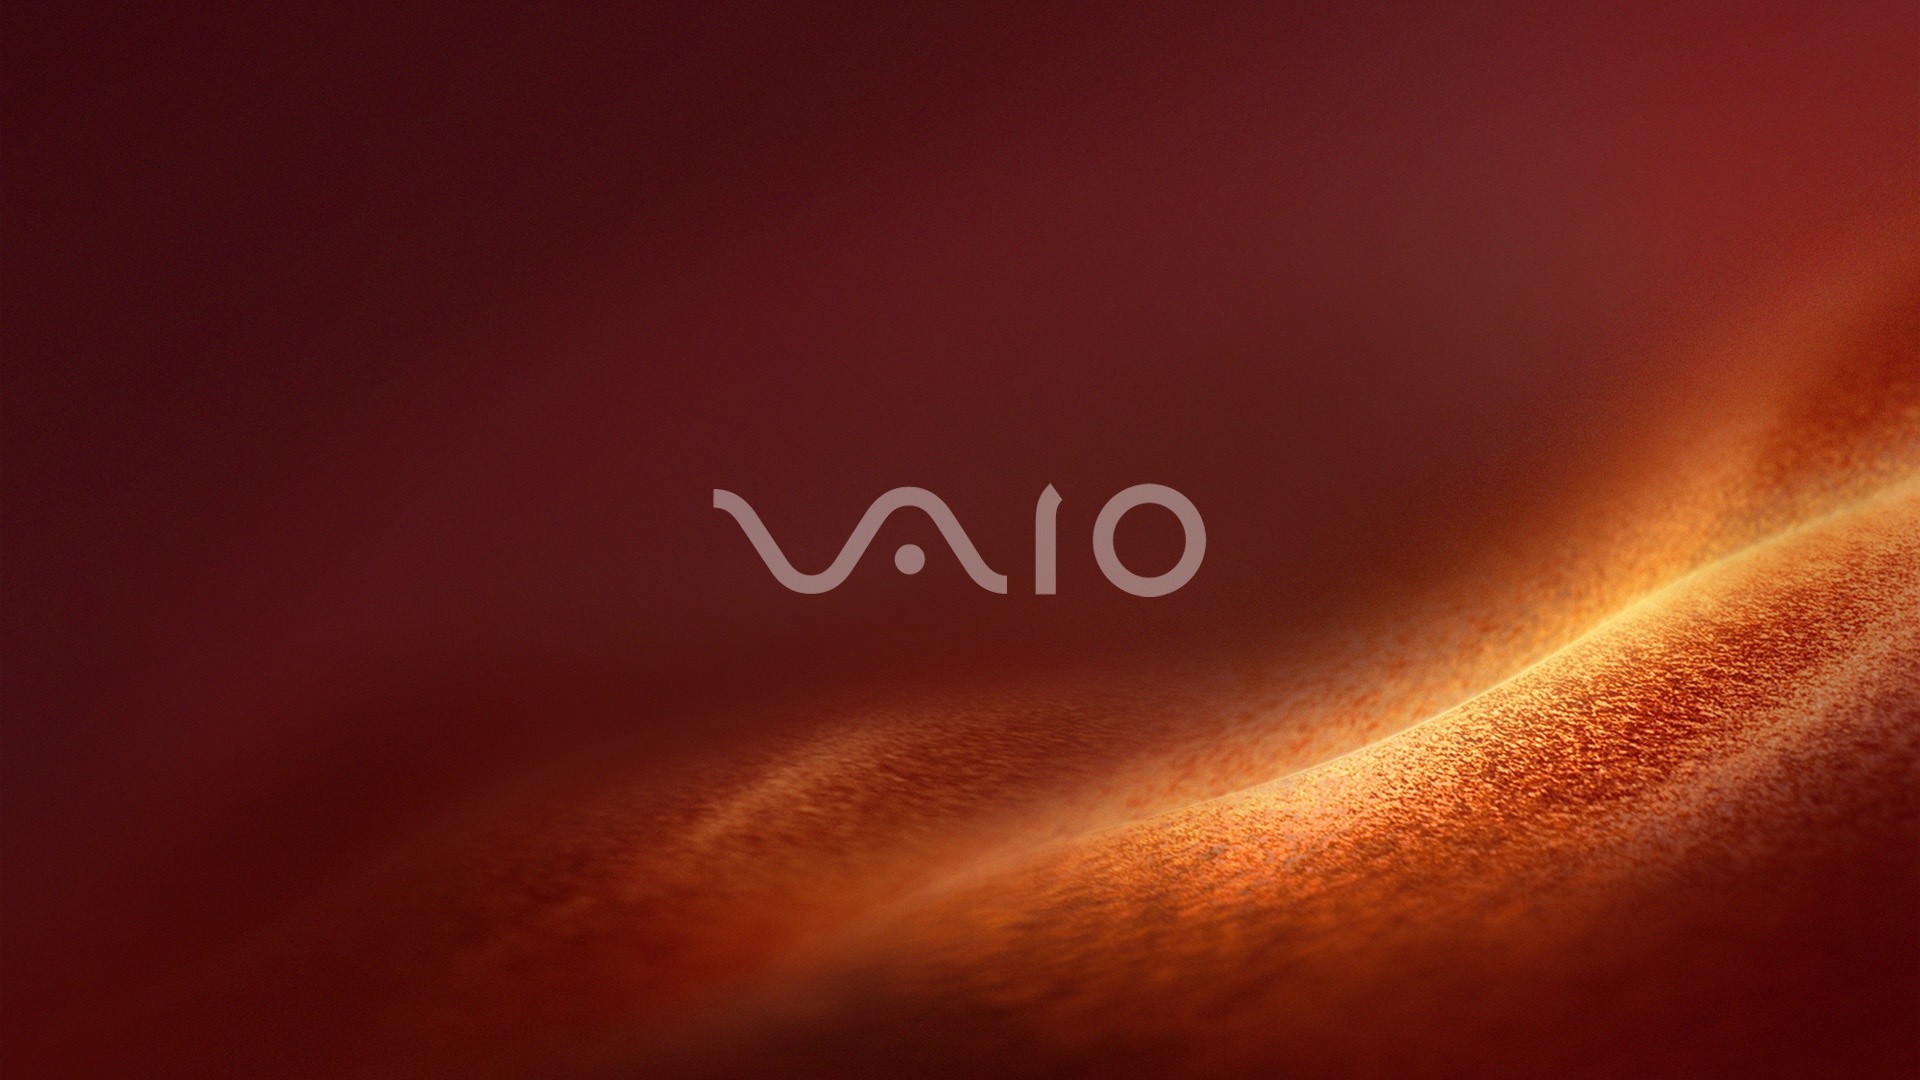 1920x1080  Sony Vaio Wallpapers For Desktop  Full HD